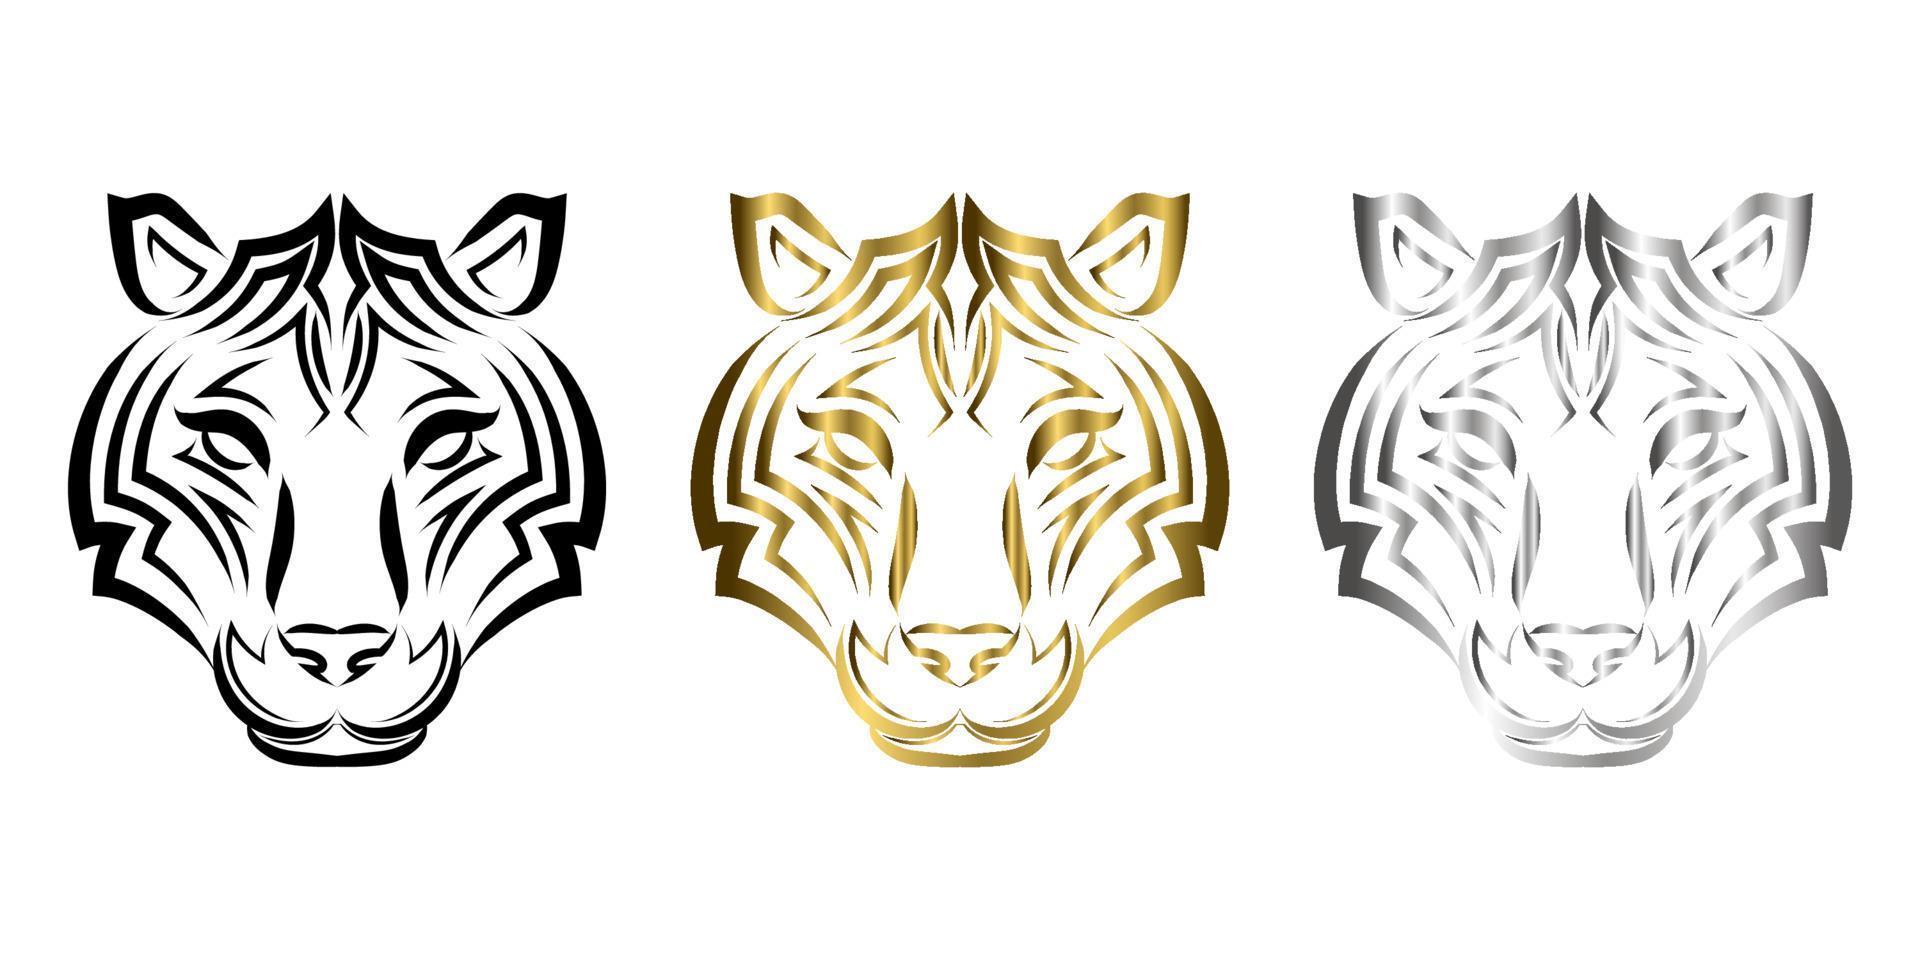 Line art vector of tiger head. Suitable for use as decoration or logo.